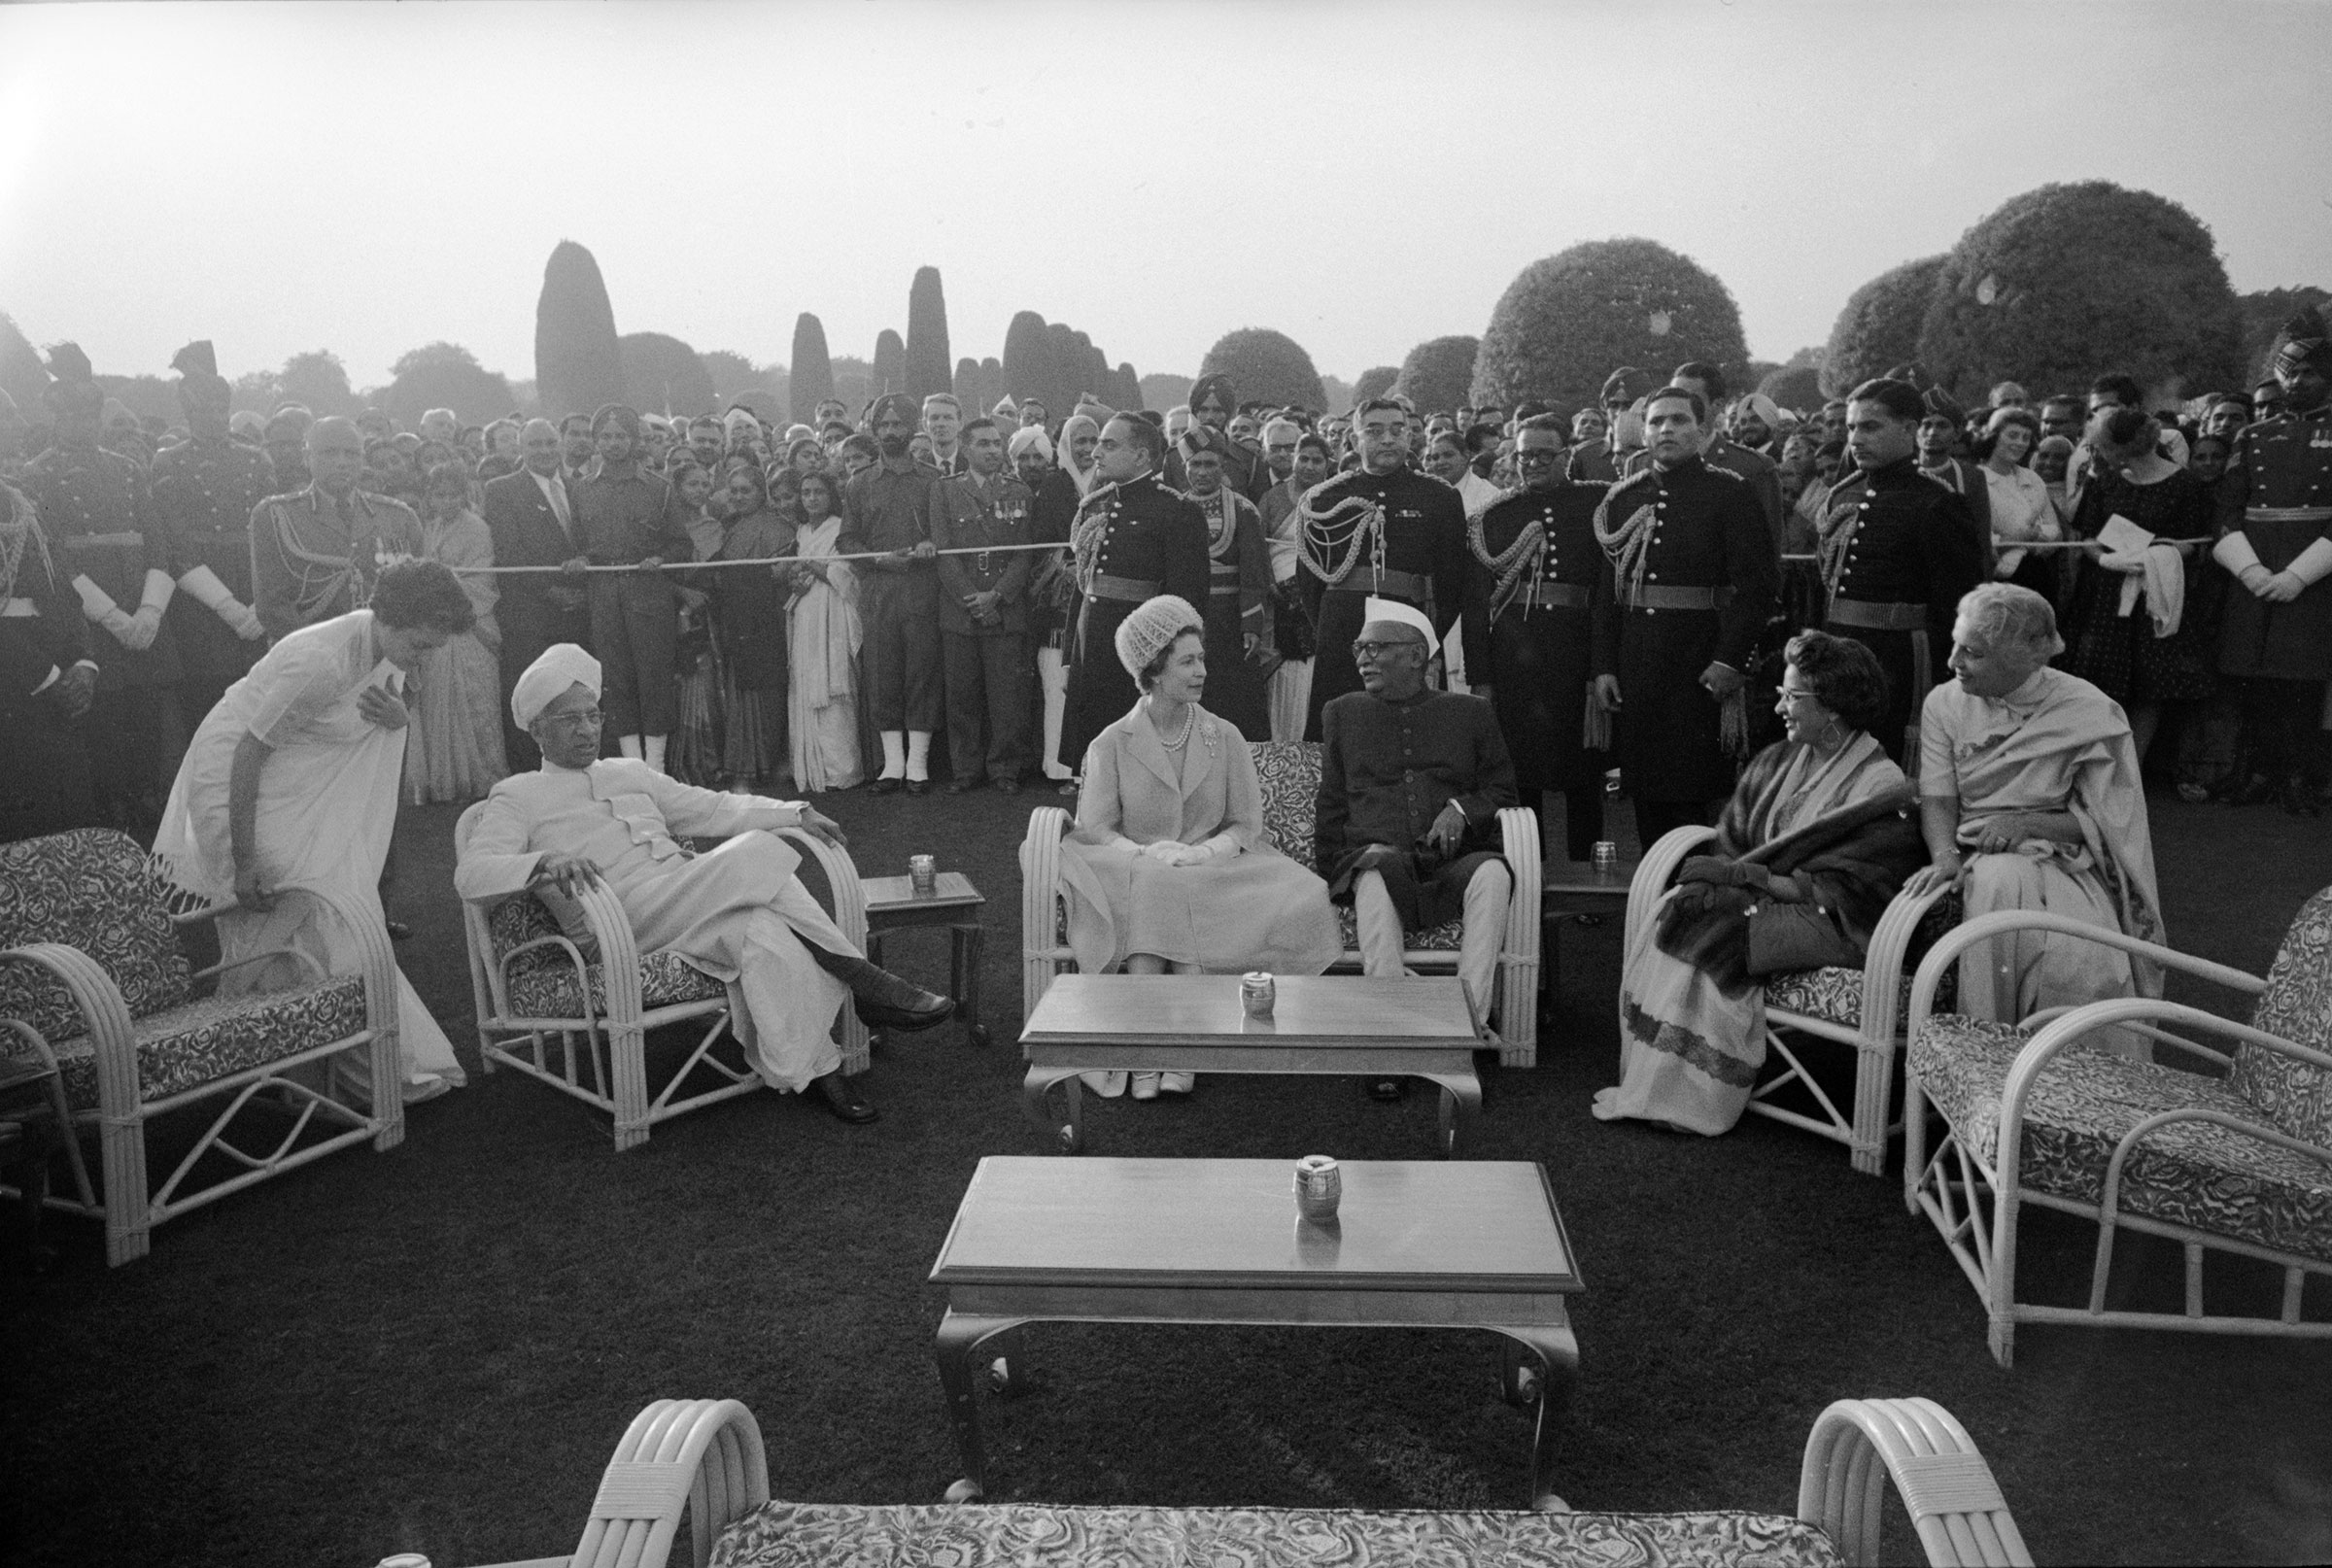 Queen Elizabeth II with India's President Rajendra Prasad at garden party reception at the President's Palace during the Queen's trip to India in 1961. (Hank Walker—The LIFE Picture Collection/Getty Images)